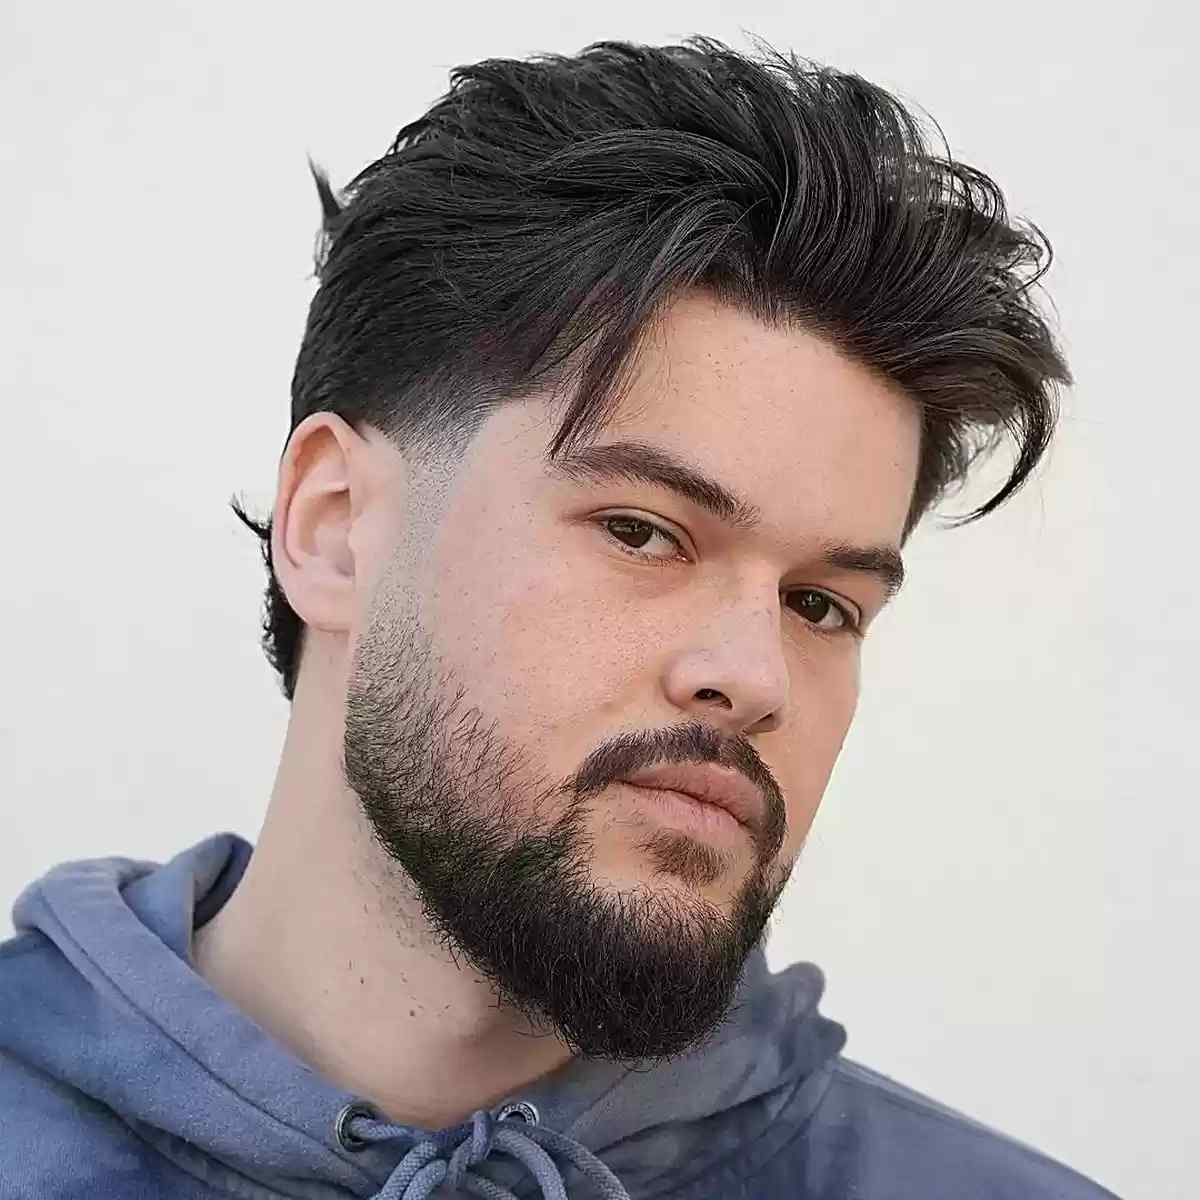 Beard Fade with a Mid-Length Messy Cut for Men with Thick Hair